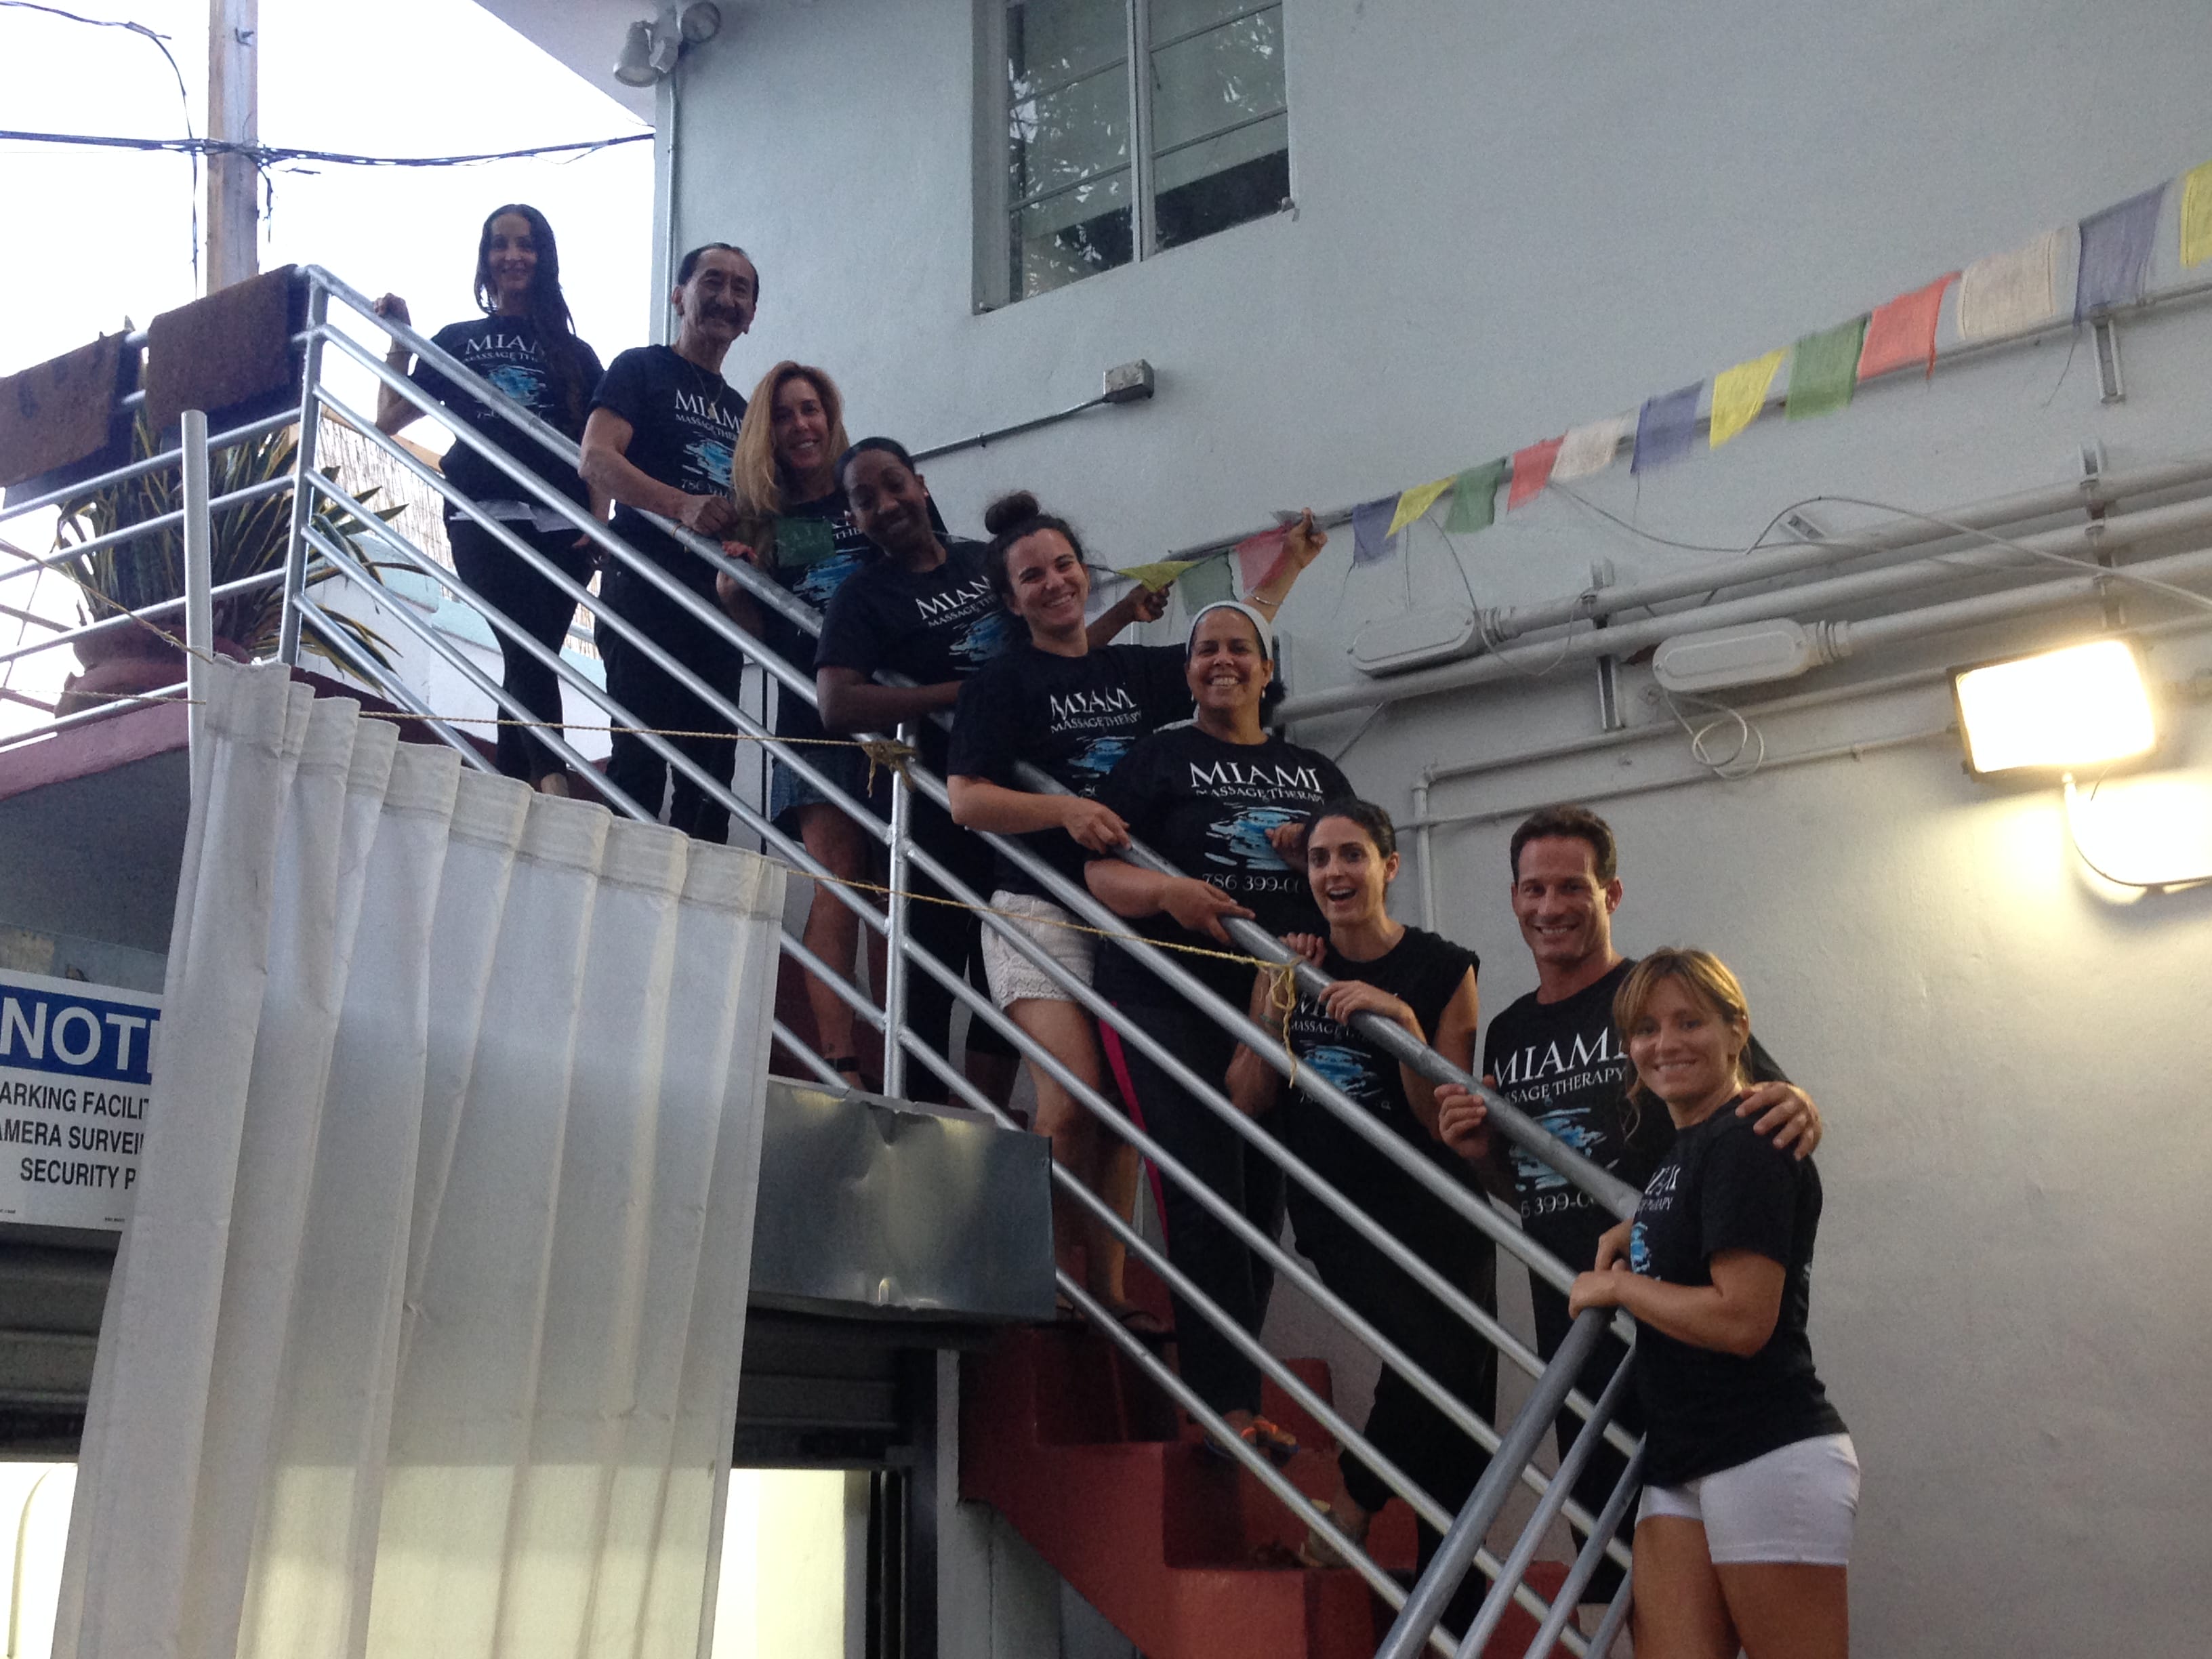 A group of people wearing matching shirts are standing on a staircase outside a building posing for a photo